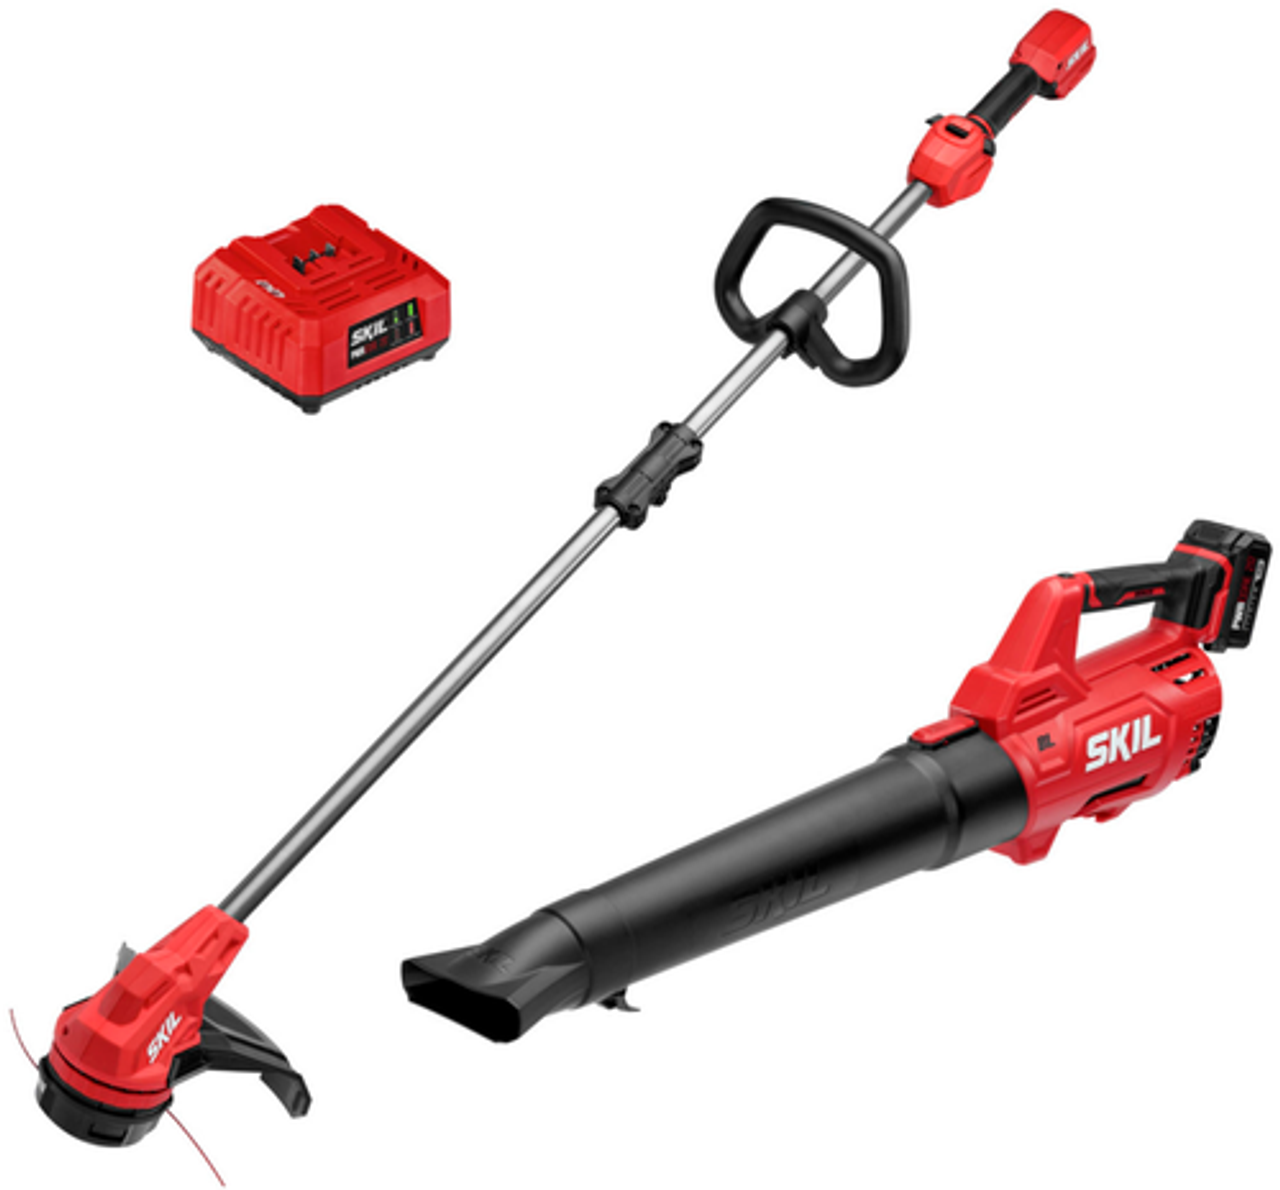 SKIL PWR CORE 20™ Brushless 20V 13-In. String Trimmer and 400 CFM Leaf Blower Kit with 4.0Ah Battery and Charger - Red/Black